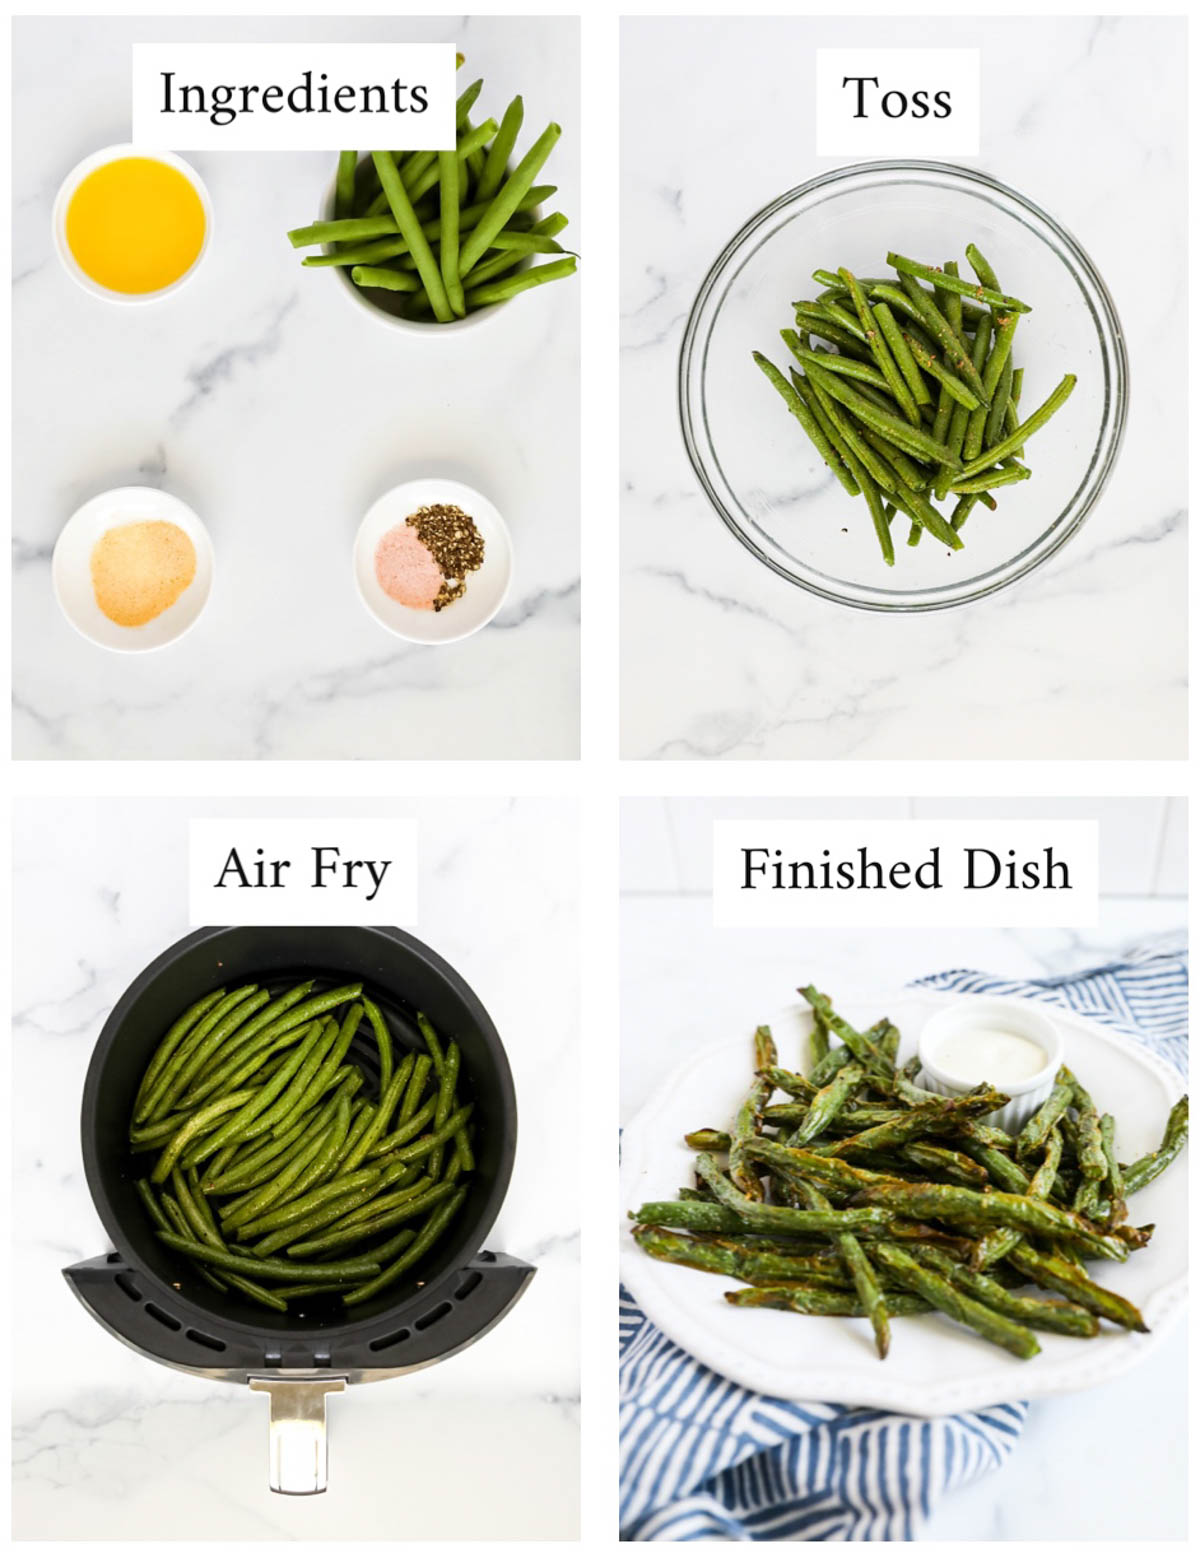 4 pictures of step by step instructions for making green beans. 1. a picture of the ingredients (olive oil, beans, garlic powder, salt and pepper), beans in a clear glass bowl, green beans in the air fryer, a finished dish of air fryer green beans